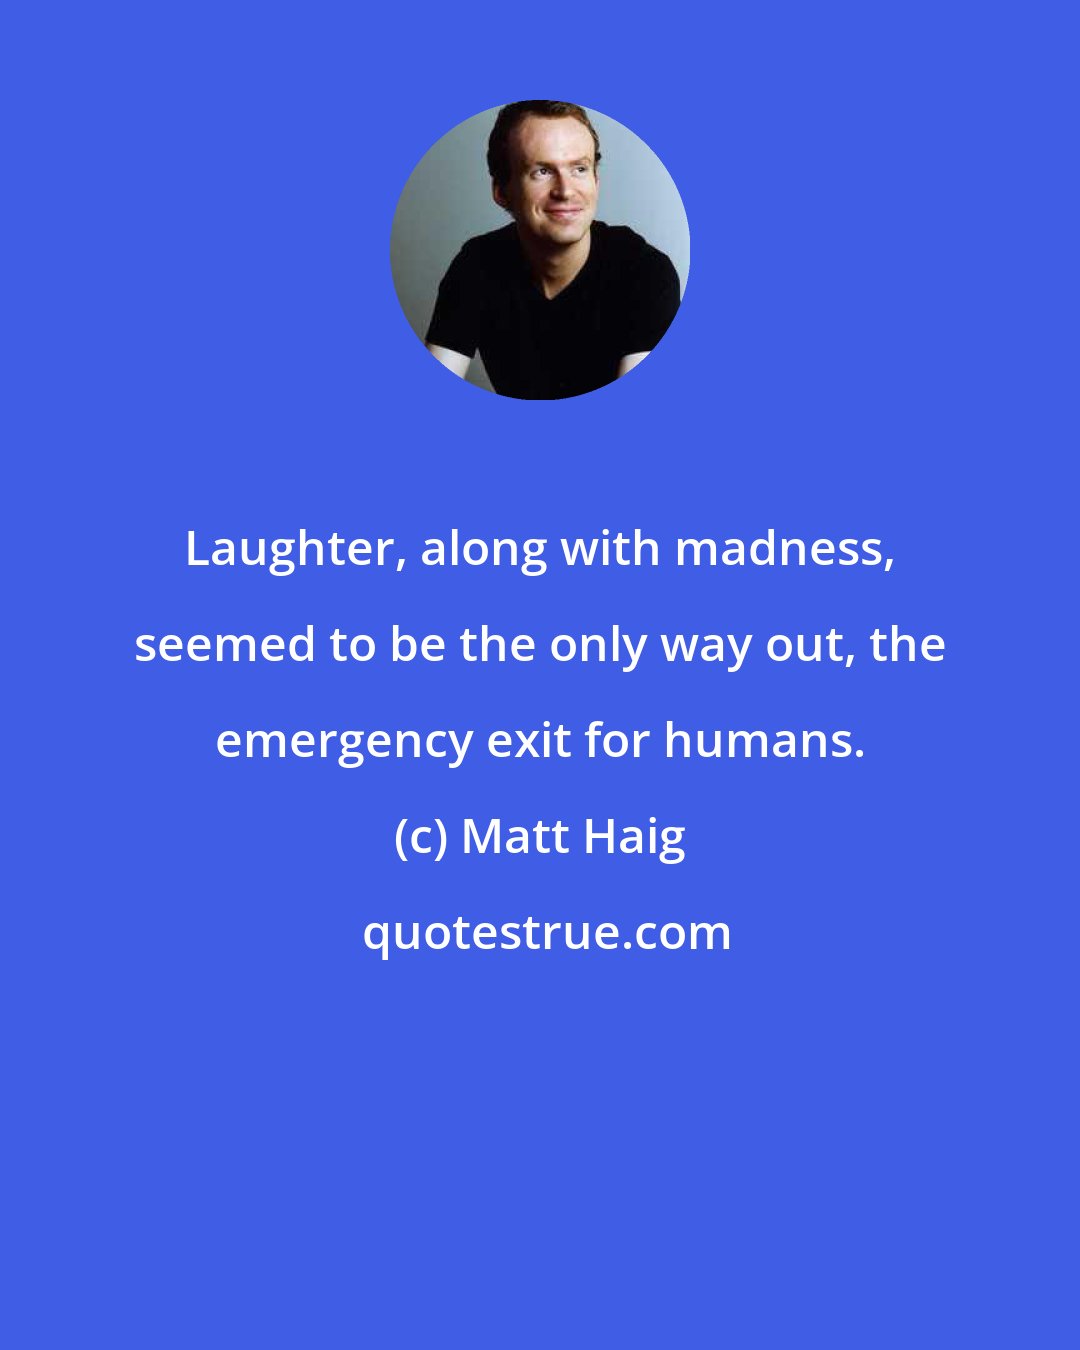 Matt Haig: Laughter, along with madness, seemed to be the only way out, the emergency exit for humans.